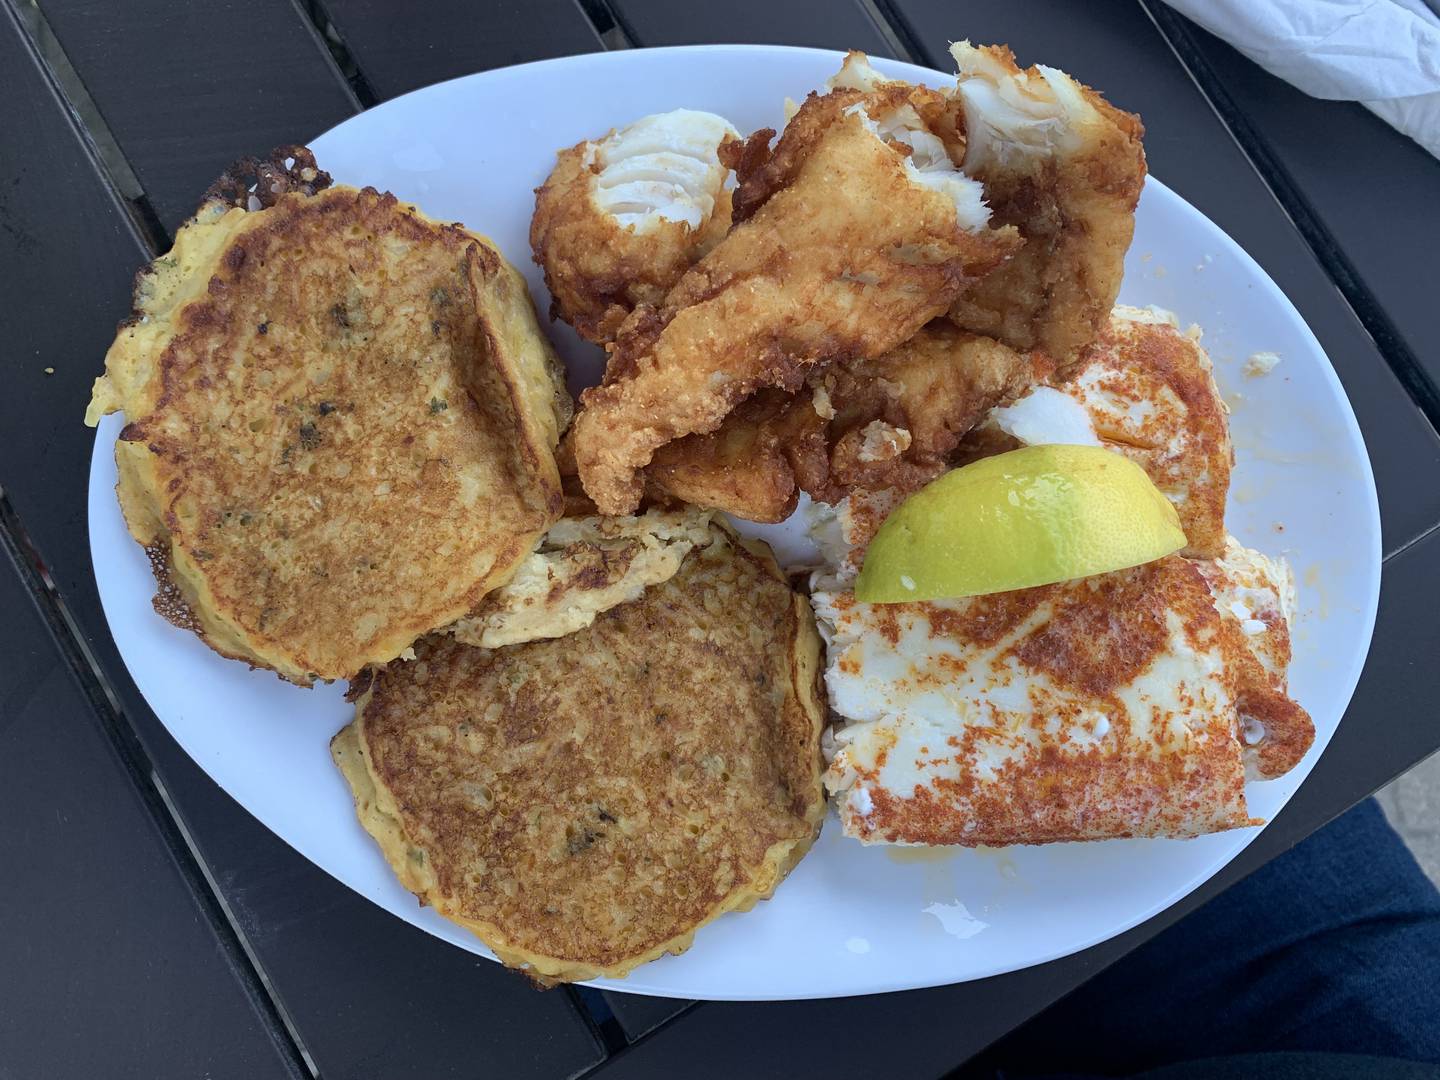 The Fish Fry at the Rusty Nail Saloon in Ringwood offers a choice of baked or beer battered haddock.